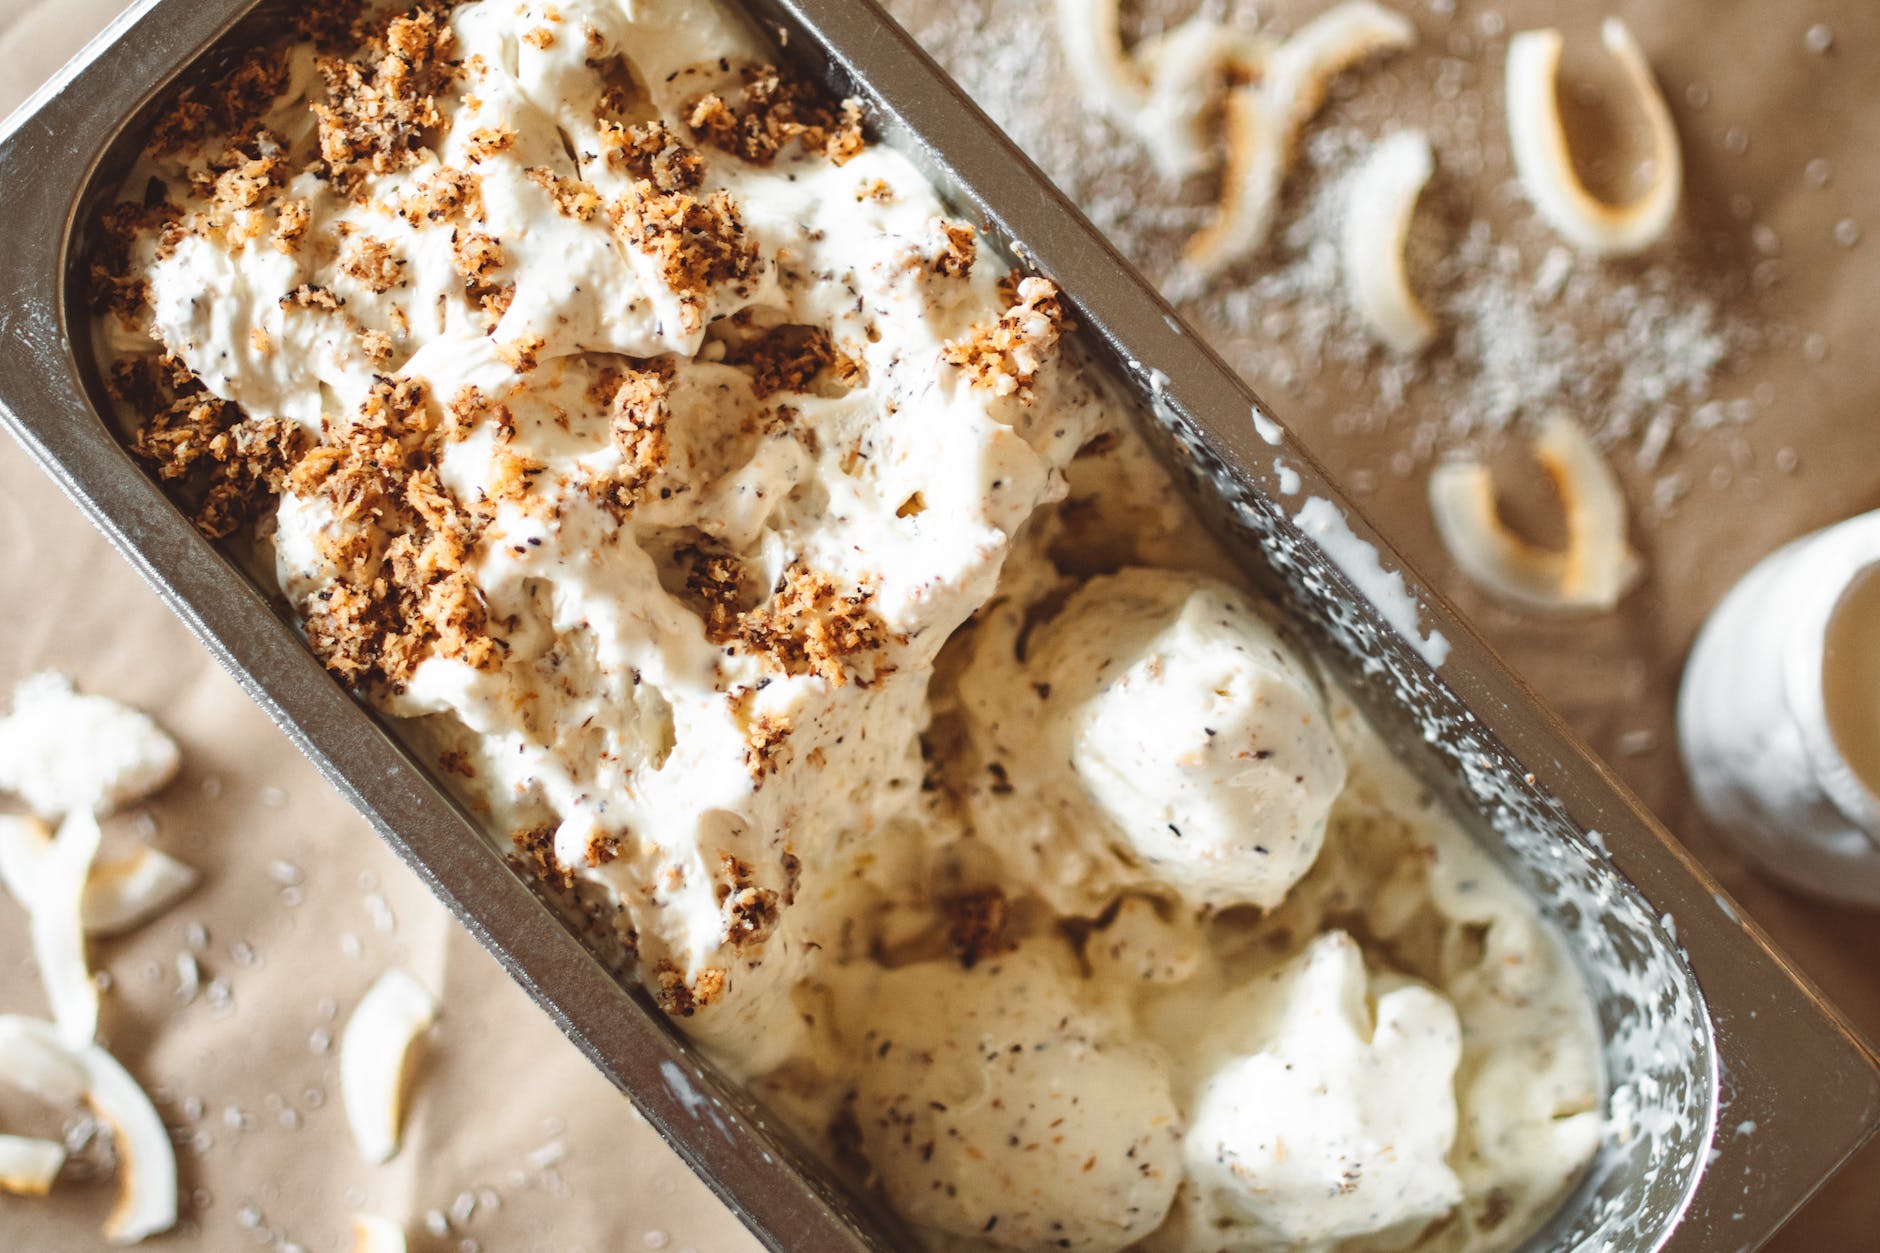 How to Make Homemade Ice Cream Without A Churn